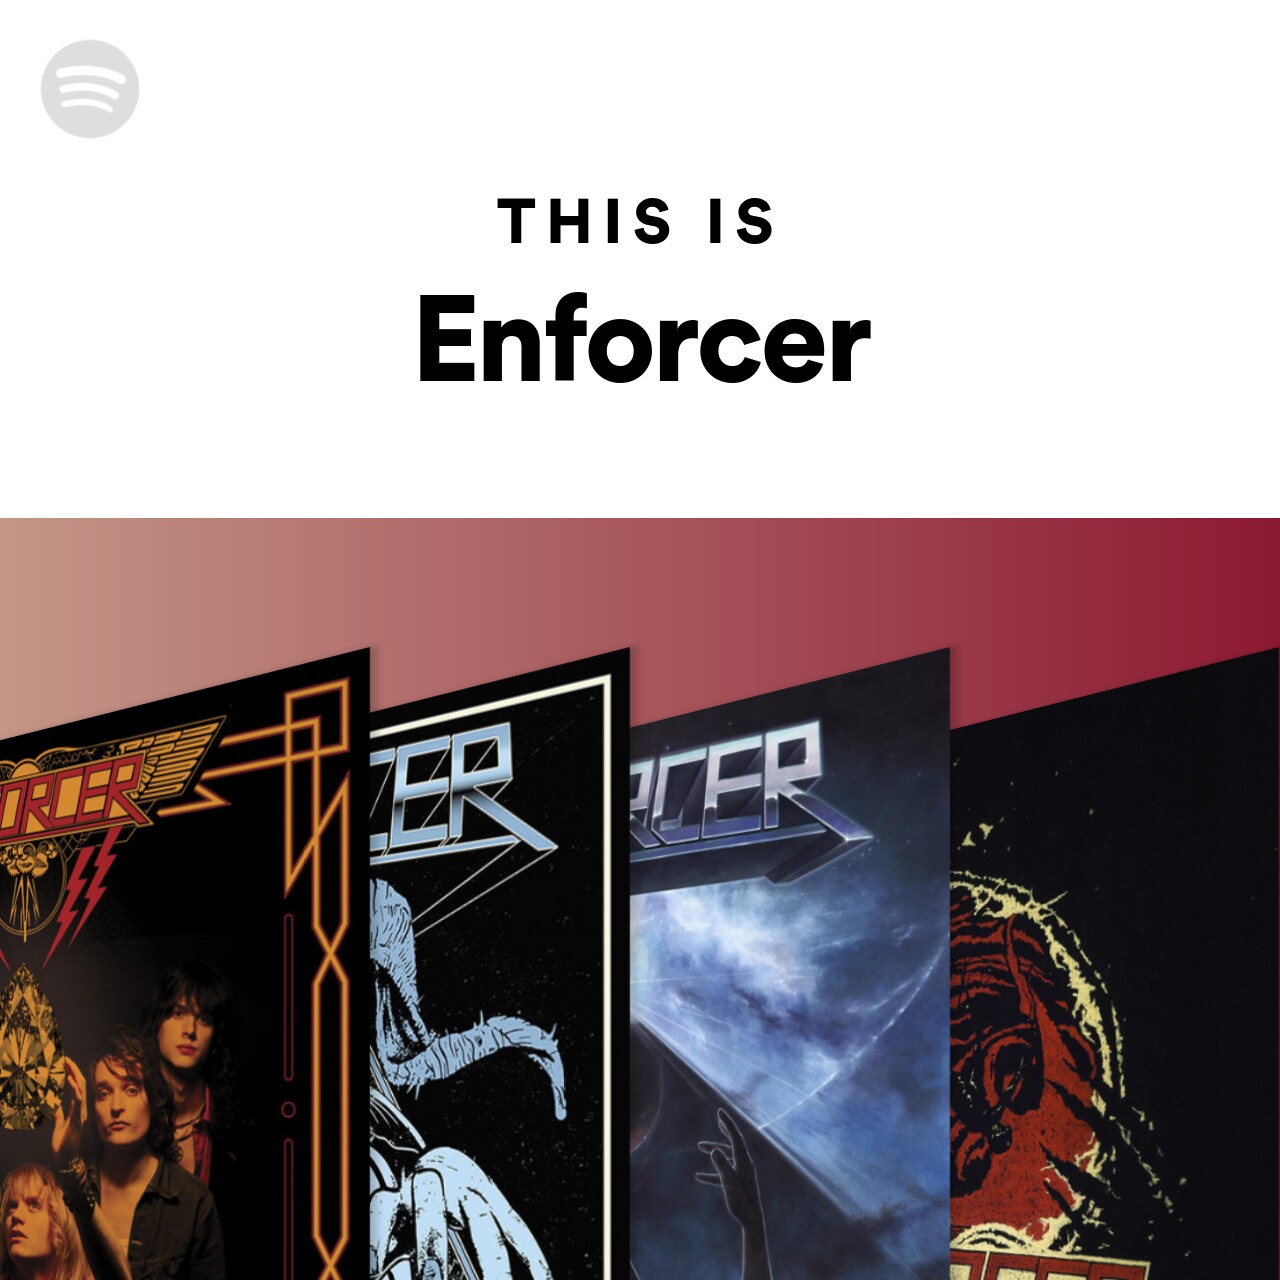 This Is Enforcer